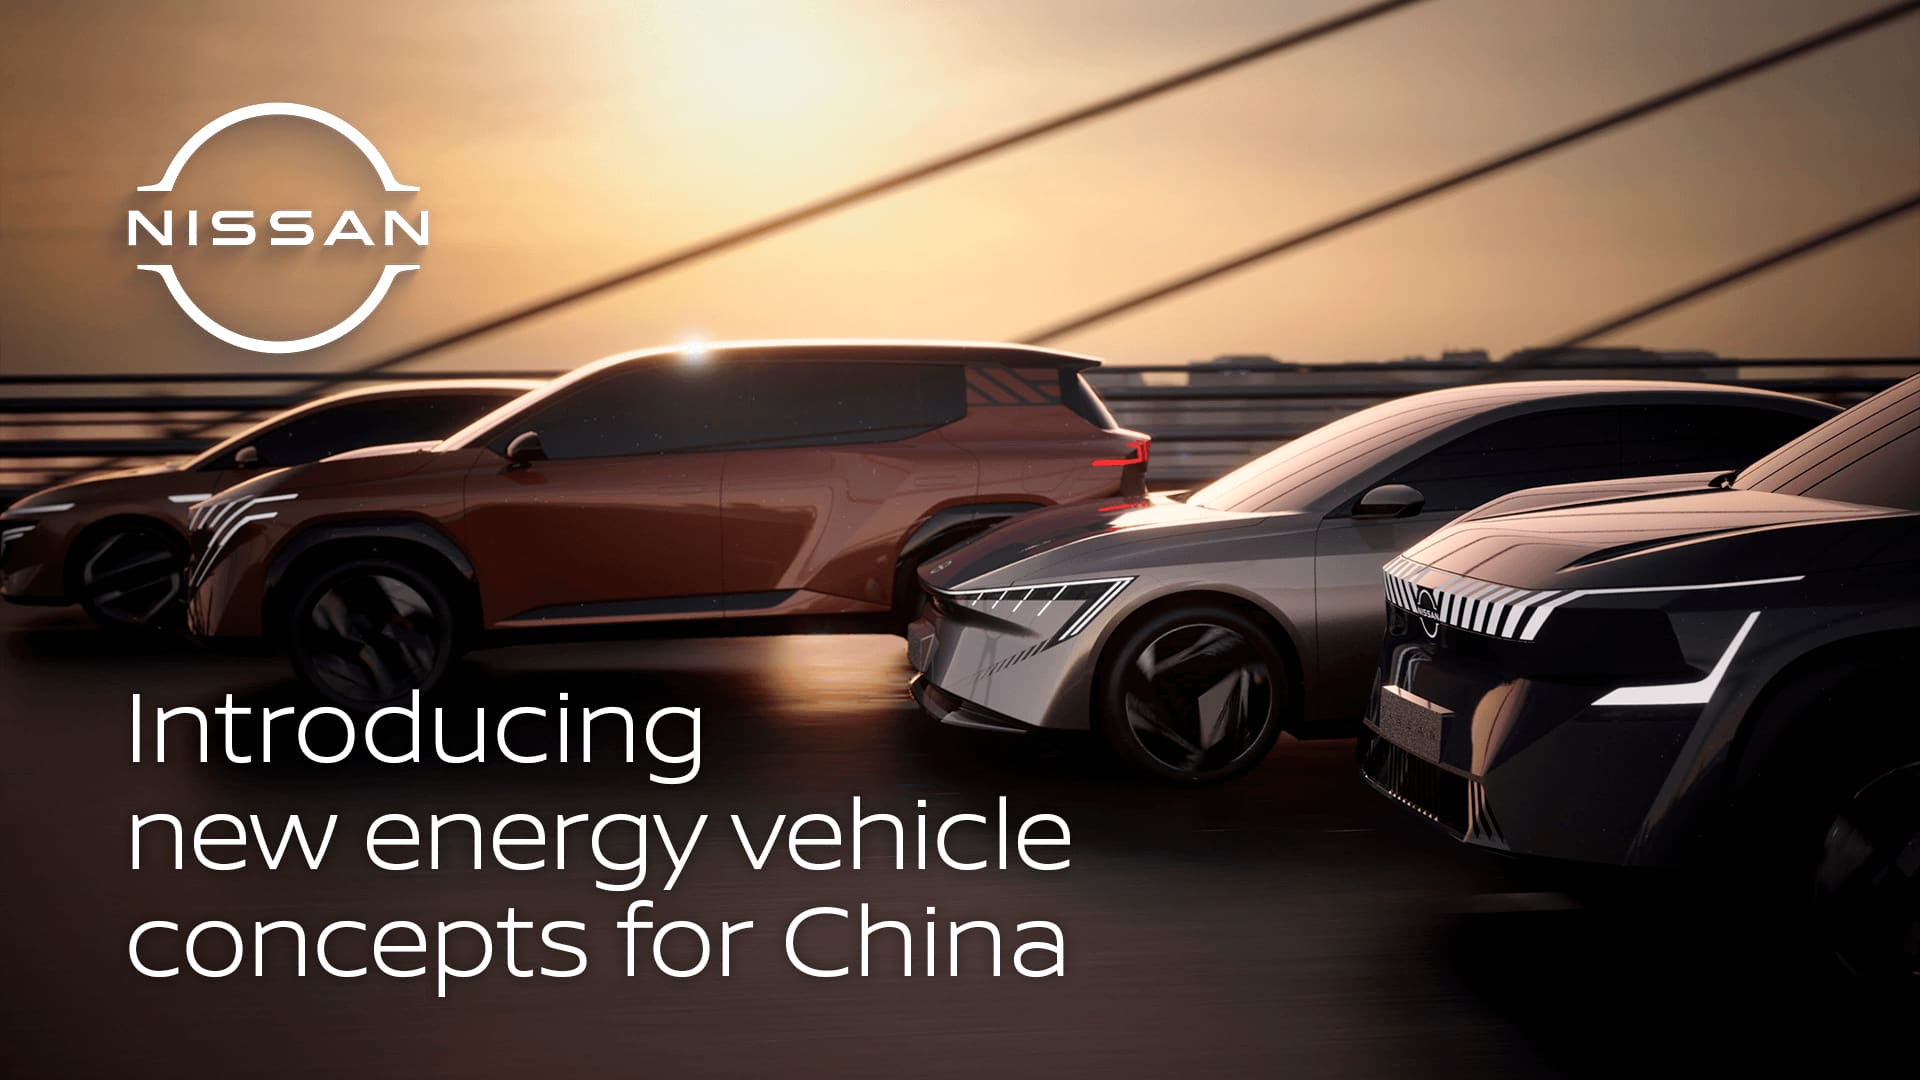 Introducing four new energy vehicle concepts for the China market